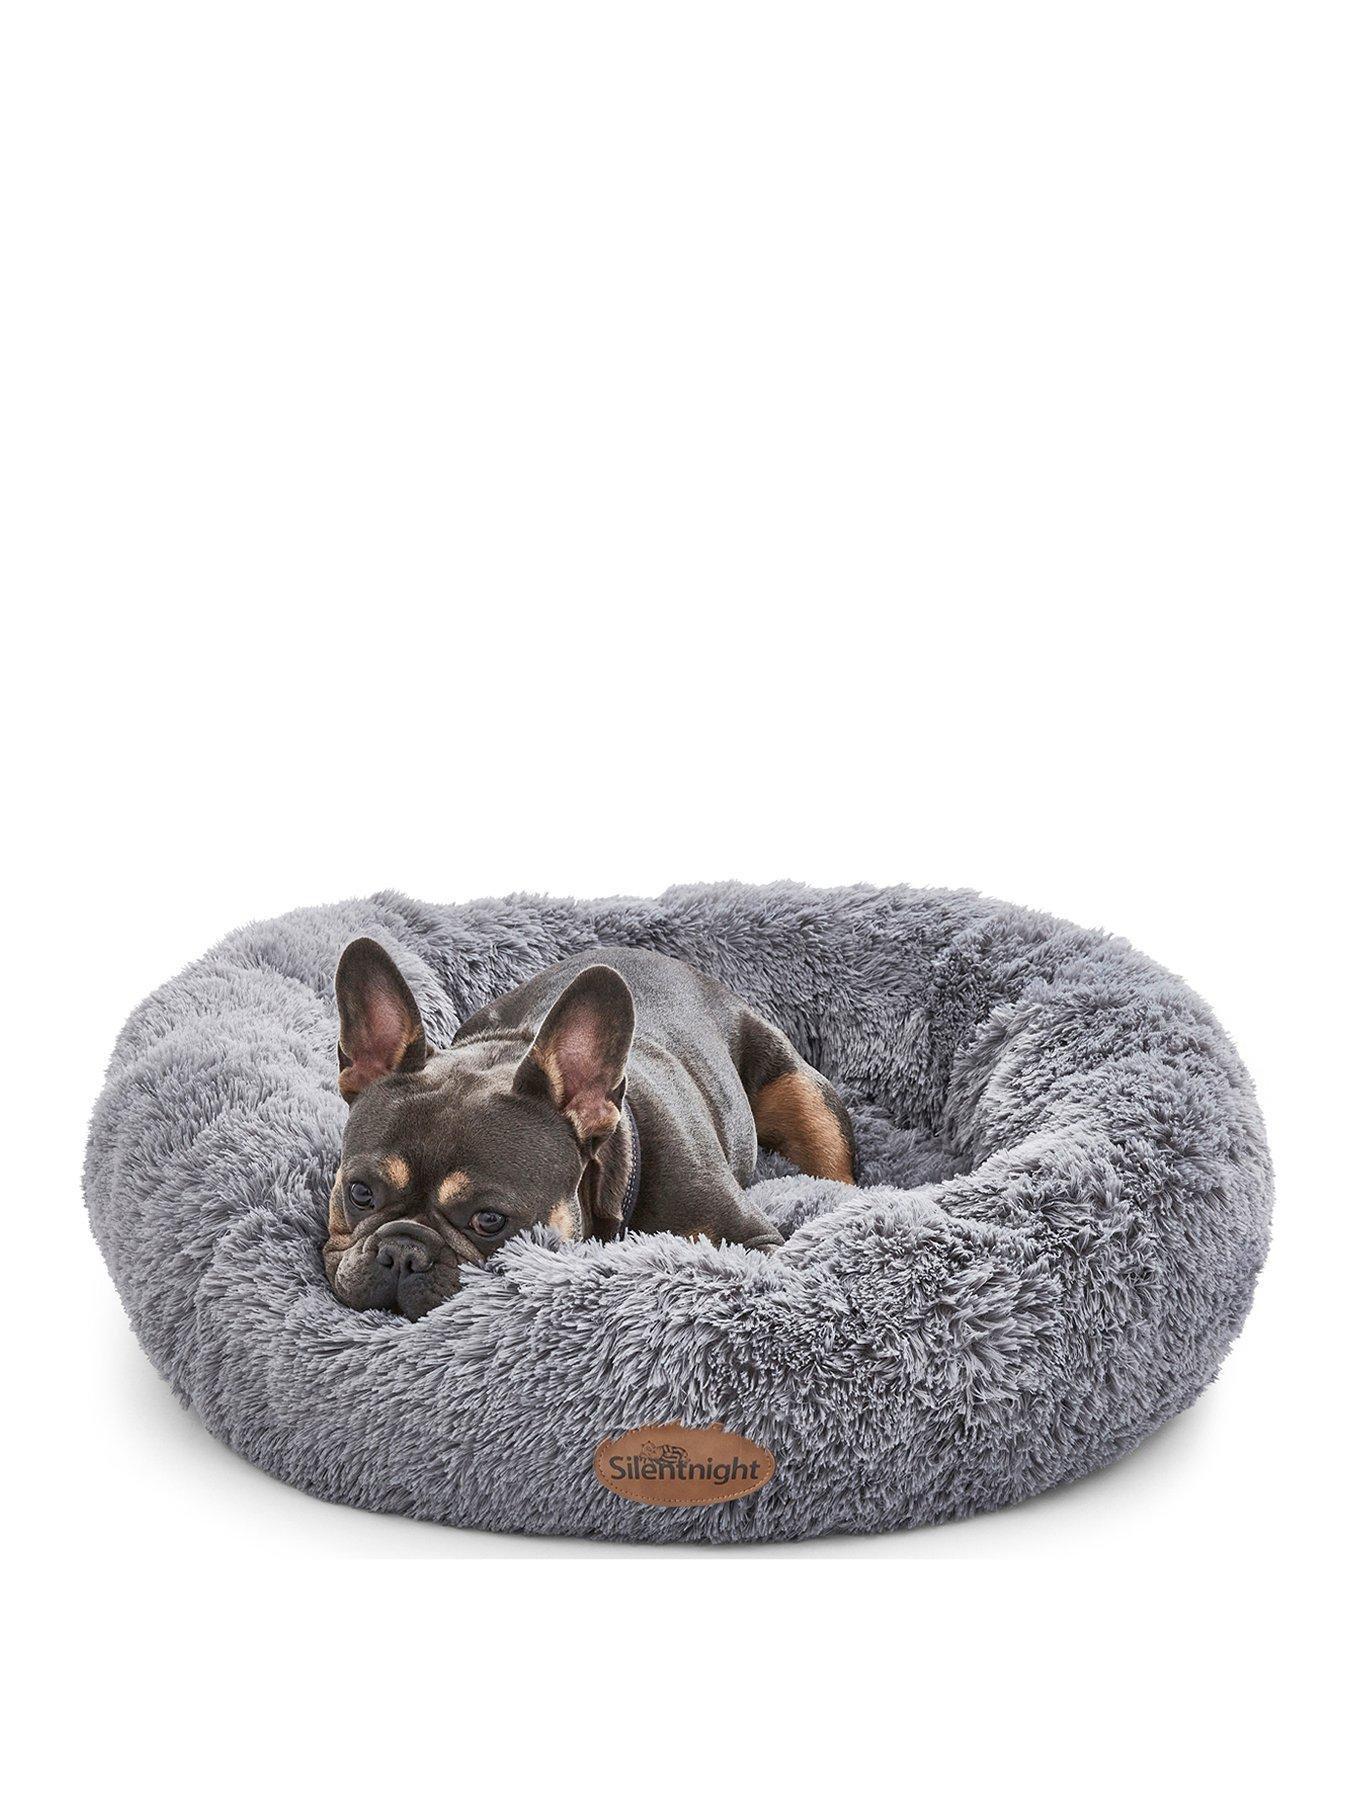 Pet Craft Supply Ultra Plush Calming Anti-Anxiety Pet Bed Includes Super Soft Comfort Blanket Great Medium Dog Bed Small Dog Bed Cat Bed Puppy Bed 